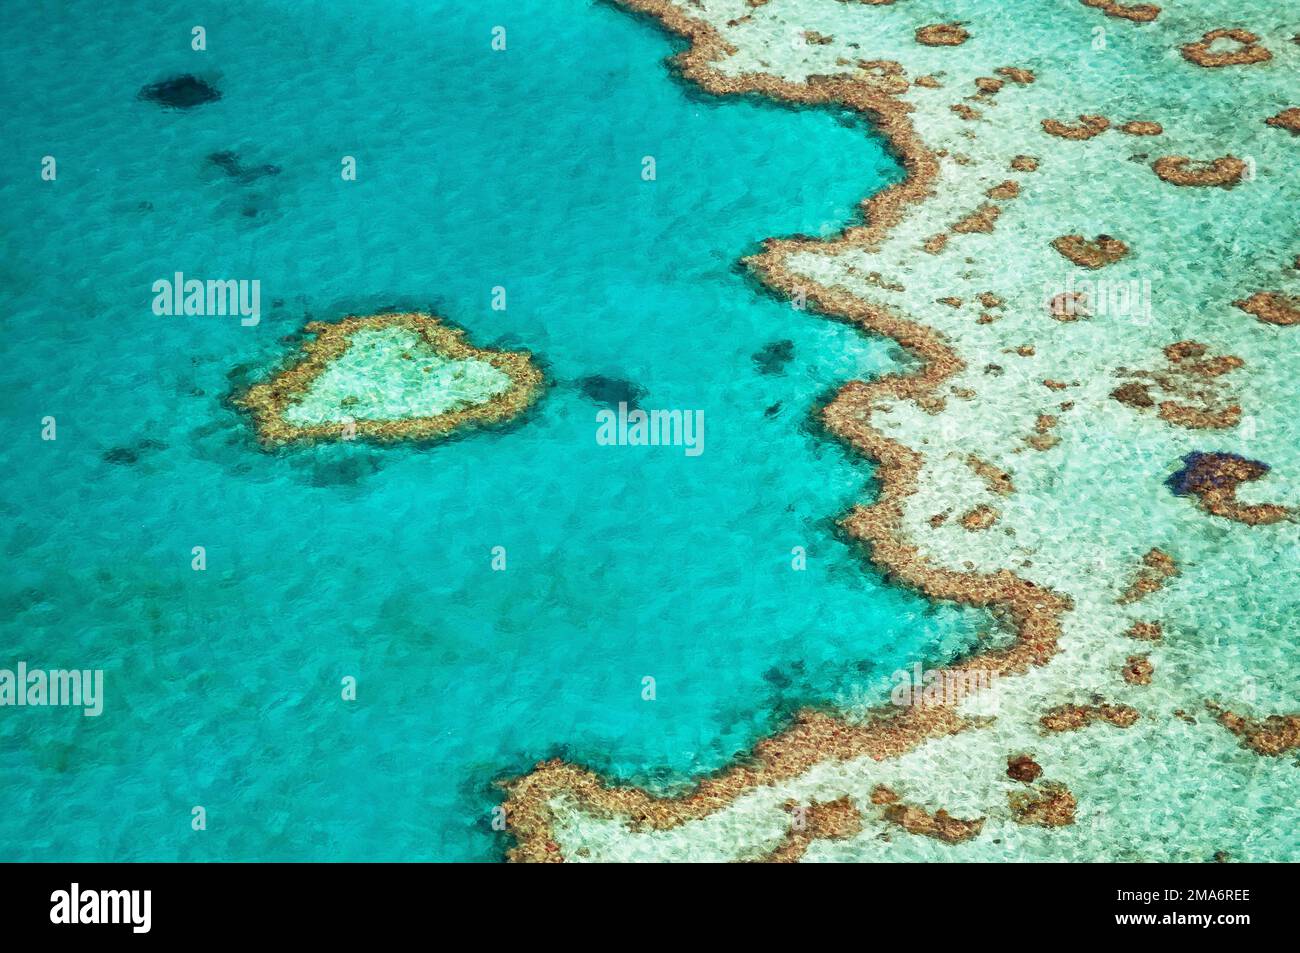 Aerial view, reefs and atolls of the Great Barrier Reef, Heart Reef ...